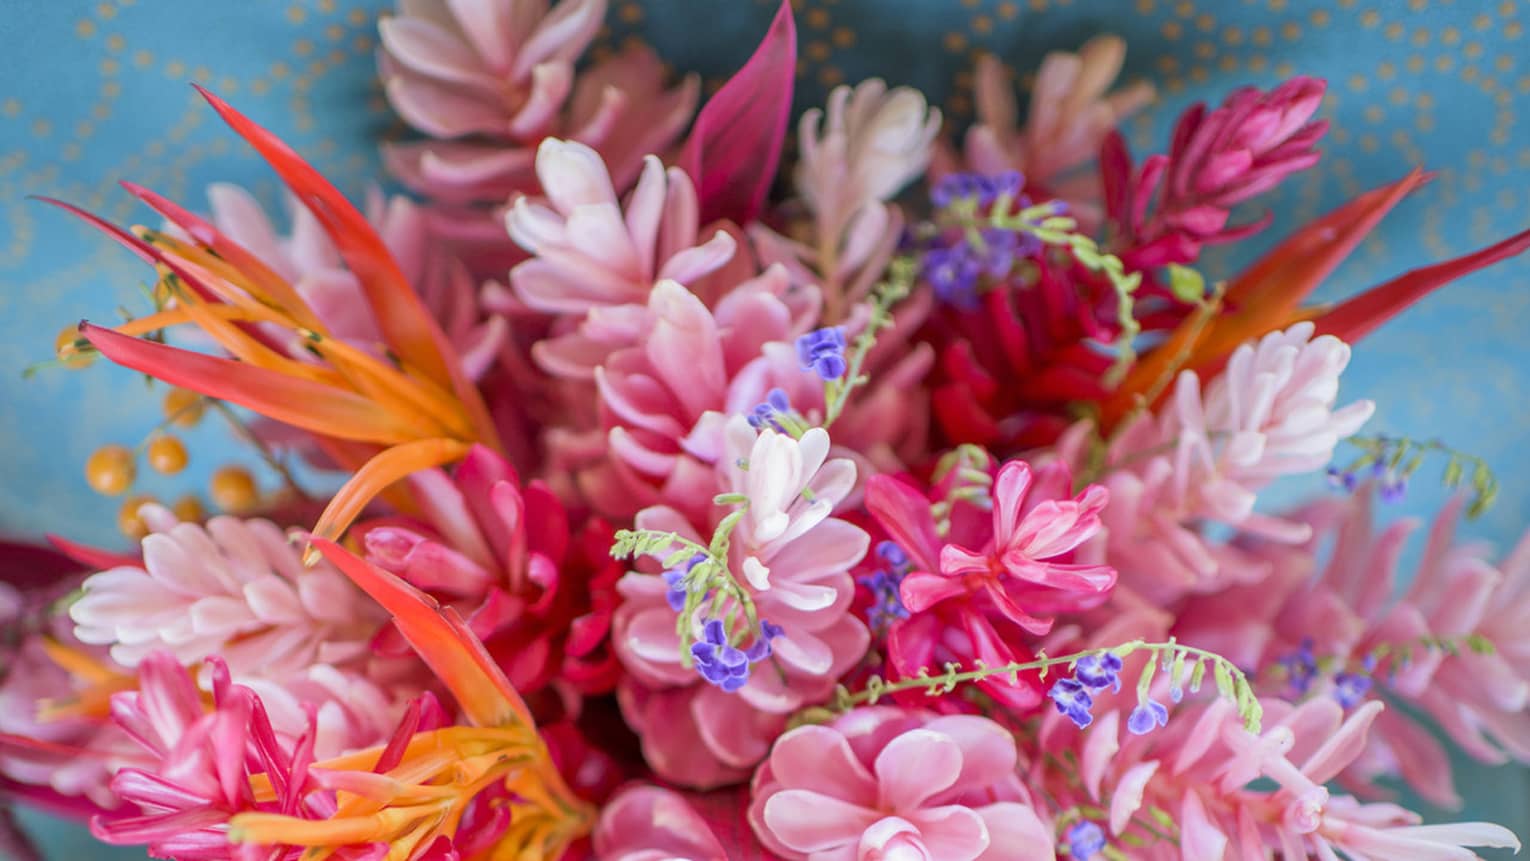 Wedding bouquet of pink and orange tropical flowers 